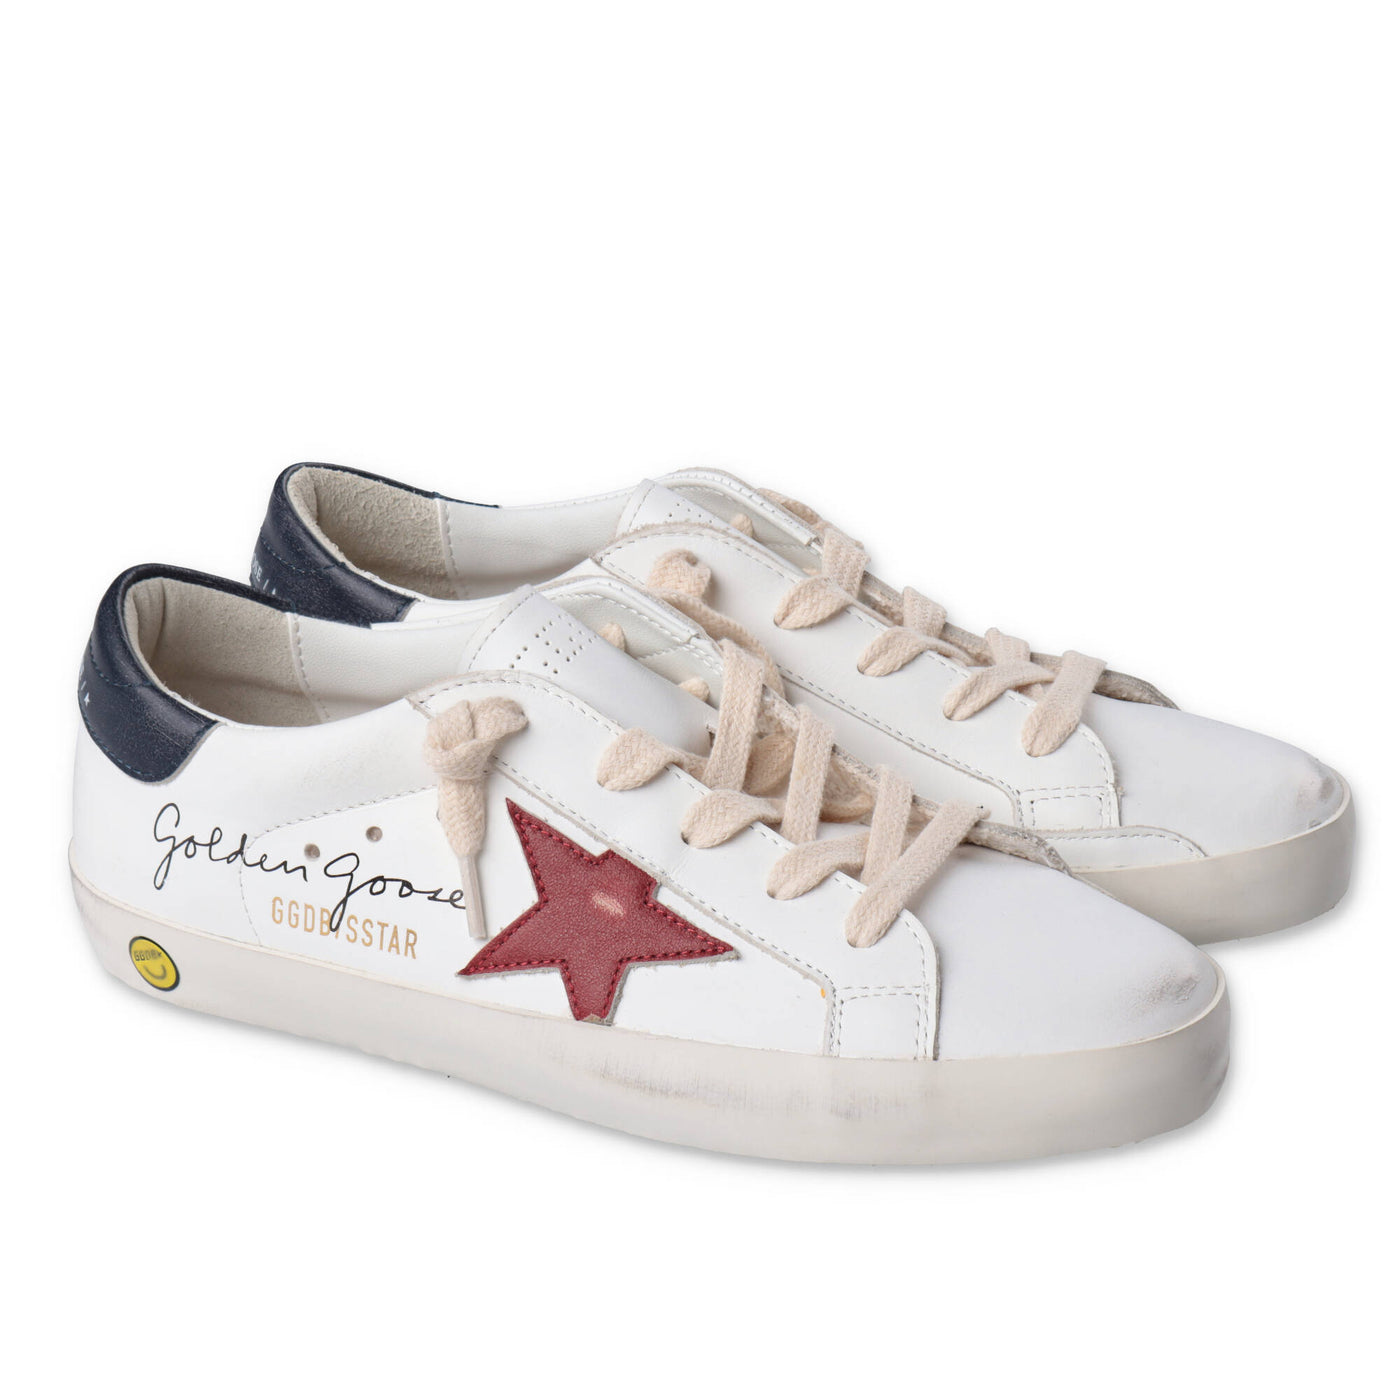 White leather Vintage effect boy GOLDEN GOOSE sneakers with laces